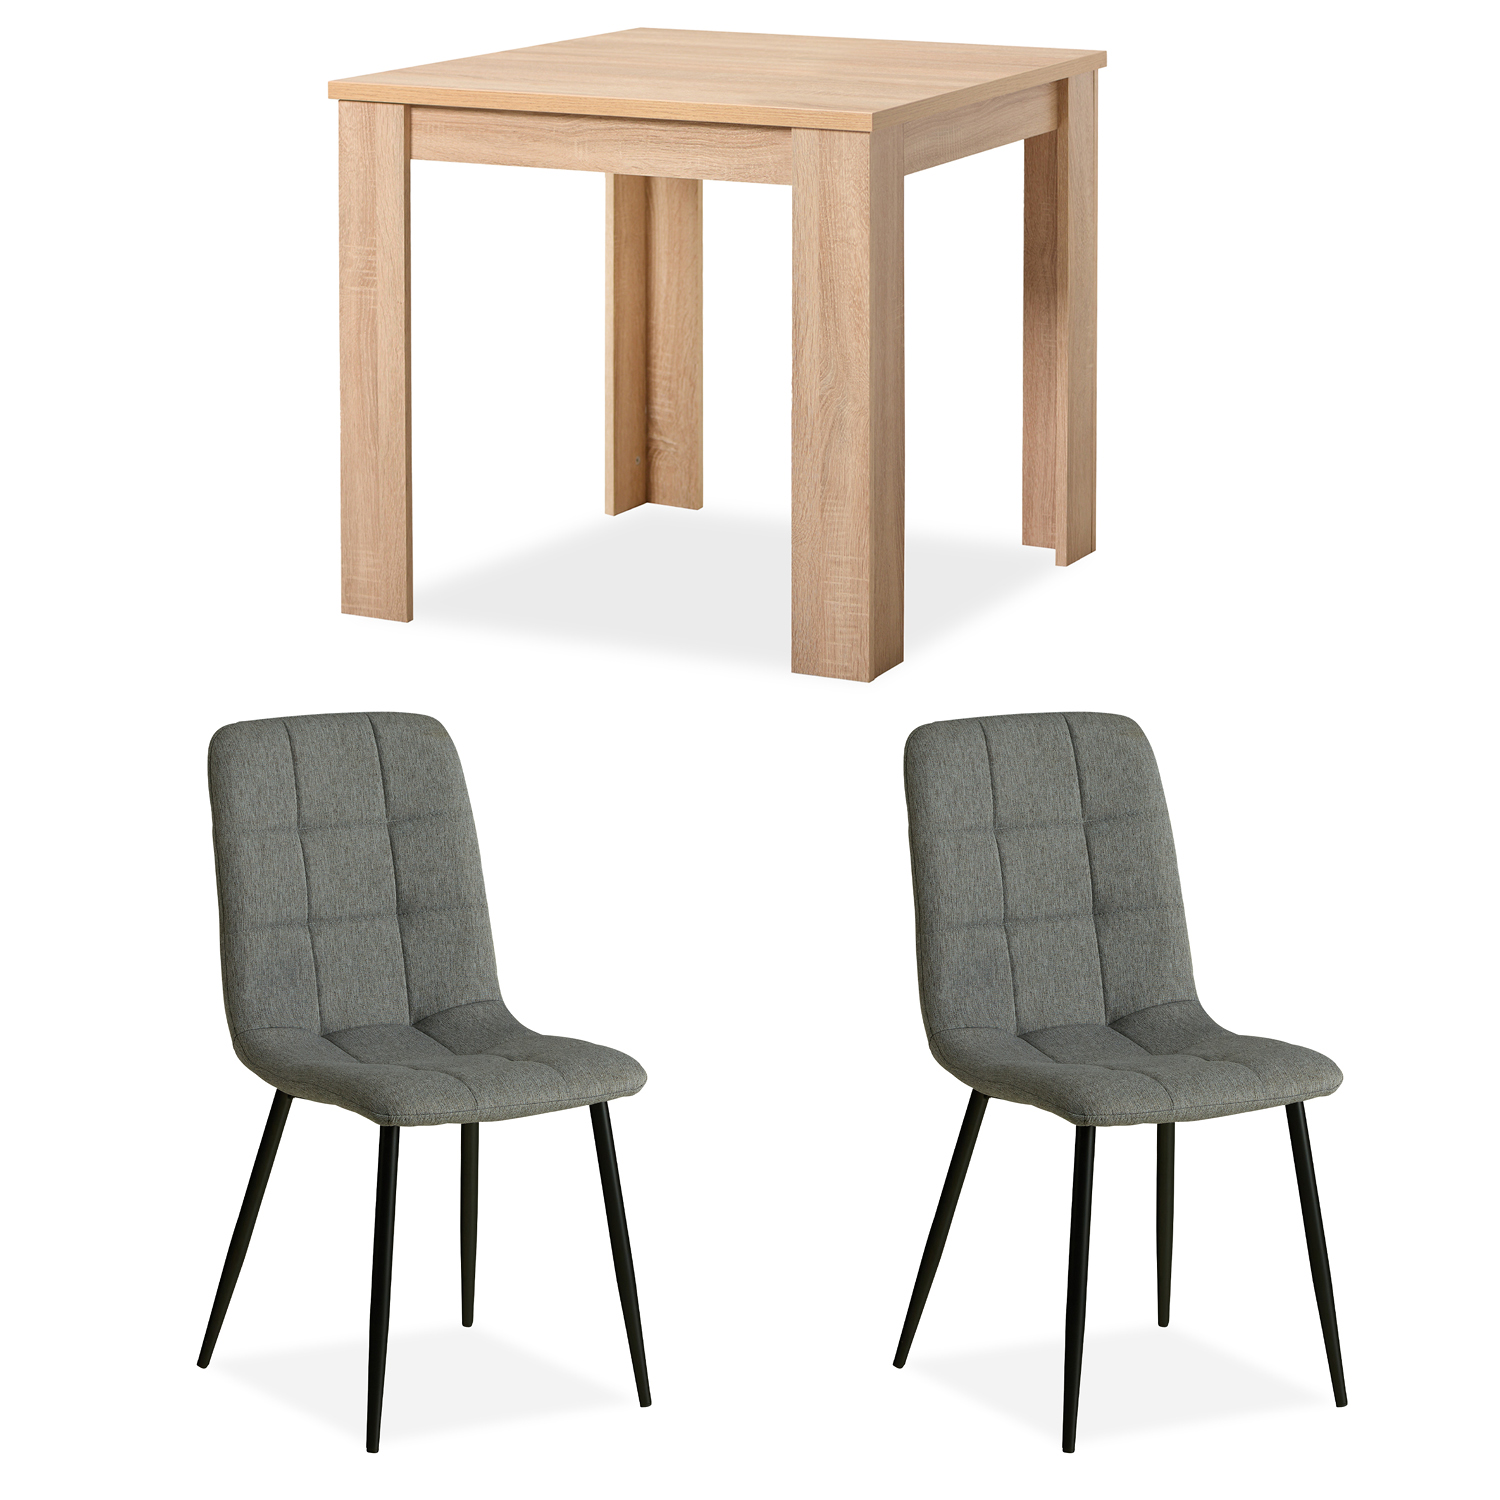 Modern Dining Table Sonoma Oak 80x80 cm with 2 Grey Linen Chairs Dining Room Table Natural Wooden Table